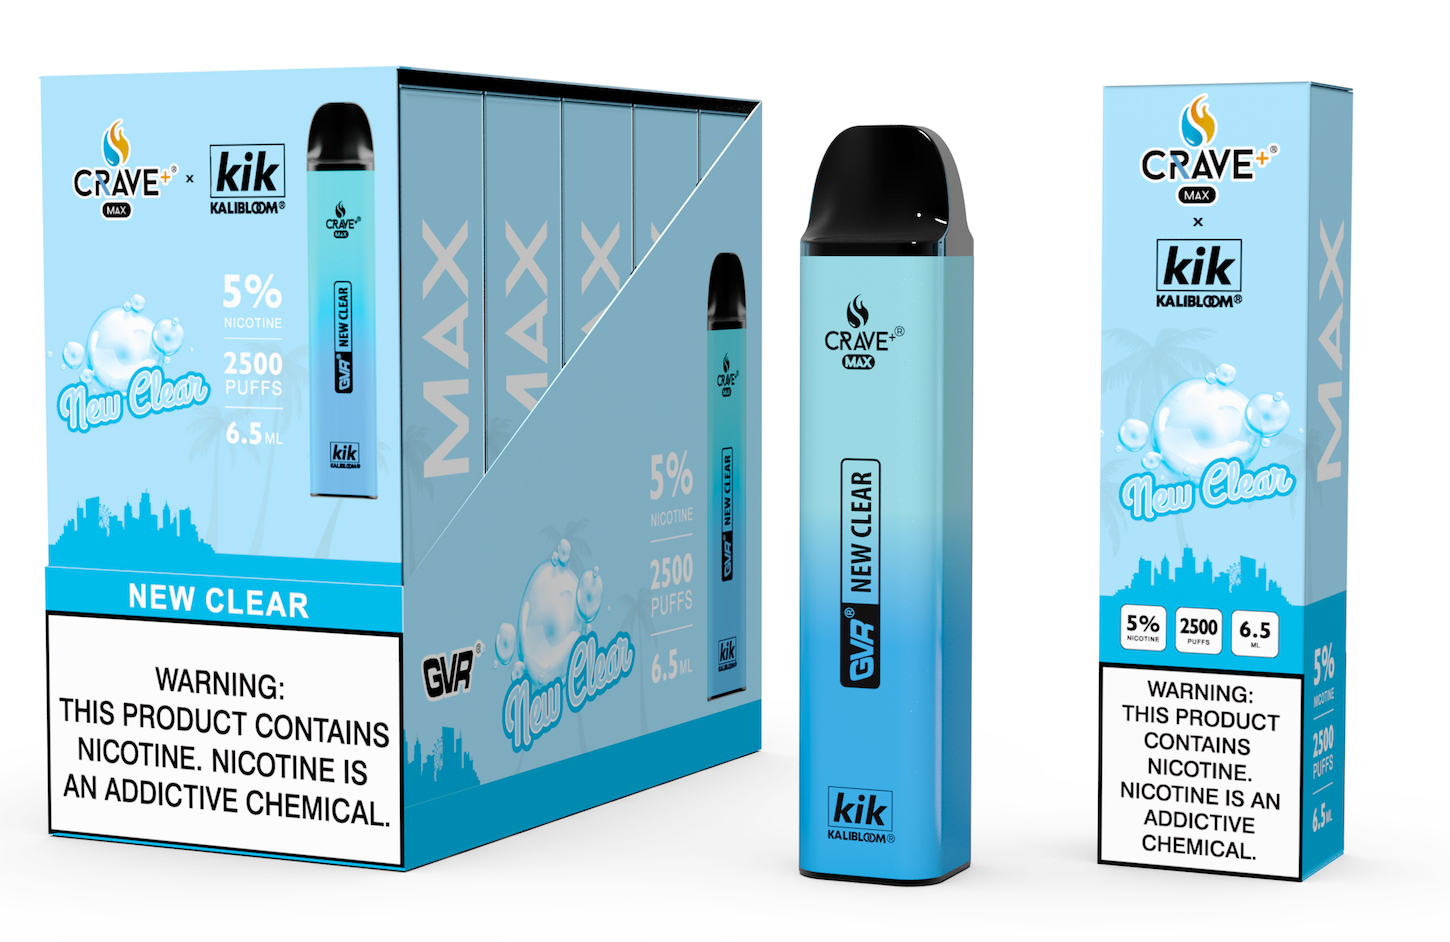 crave max, crave vape, buy crave max, crave max for sale, crave max flavors, crave flavors vape, buy crave vape online, crave max gvr, crave 2500 puffs, crave clear, crave max clear, crave clear 3%, crave clear 5%, crave max 3%, crave max 5%, crave 3%, crave 5%, crave vape clear, vape clear flavor, crave flavor clear, crave max kik, crave max limited edition, crave new clear, crave max new clear, crave max kik, crave max kalibloom clear